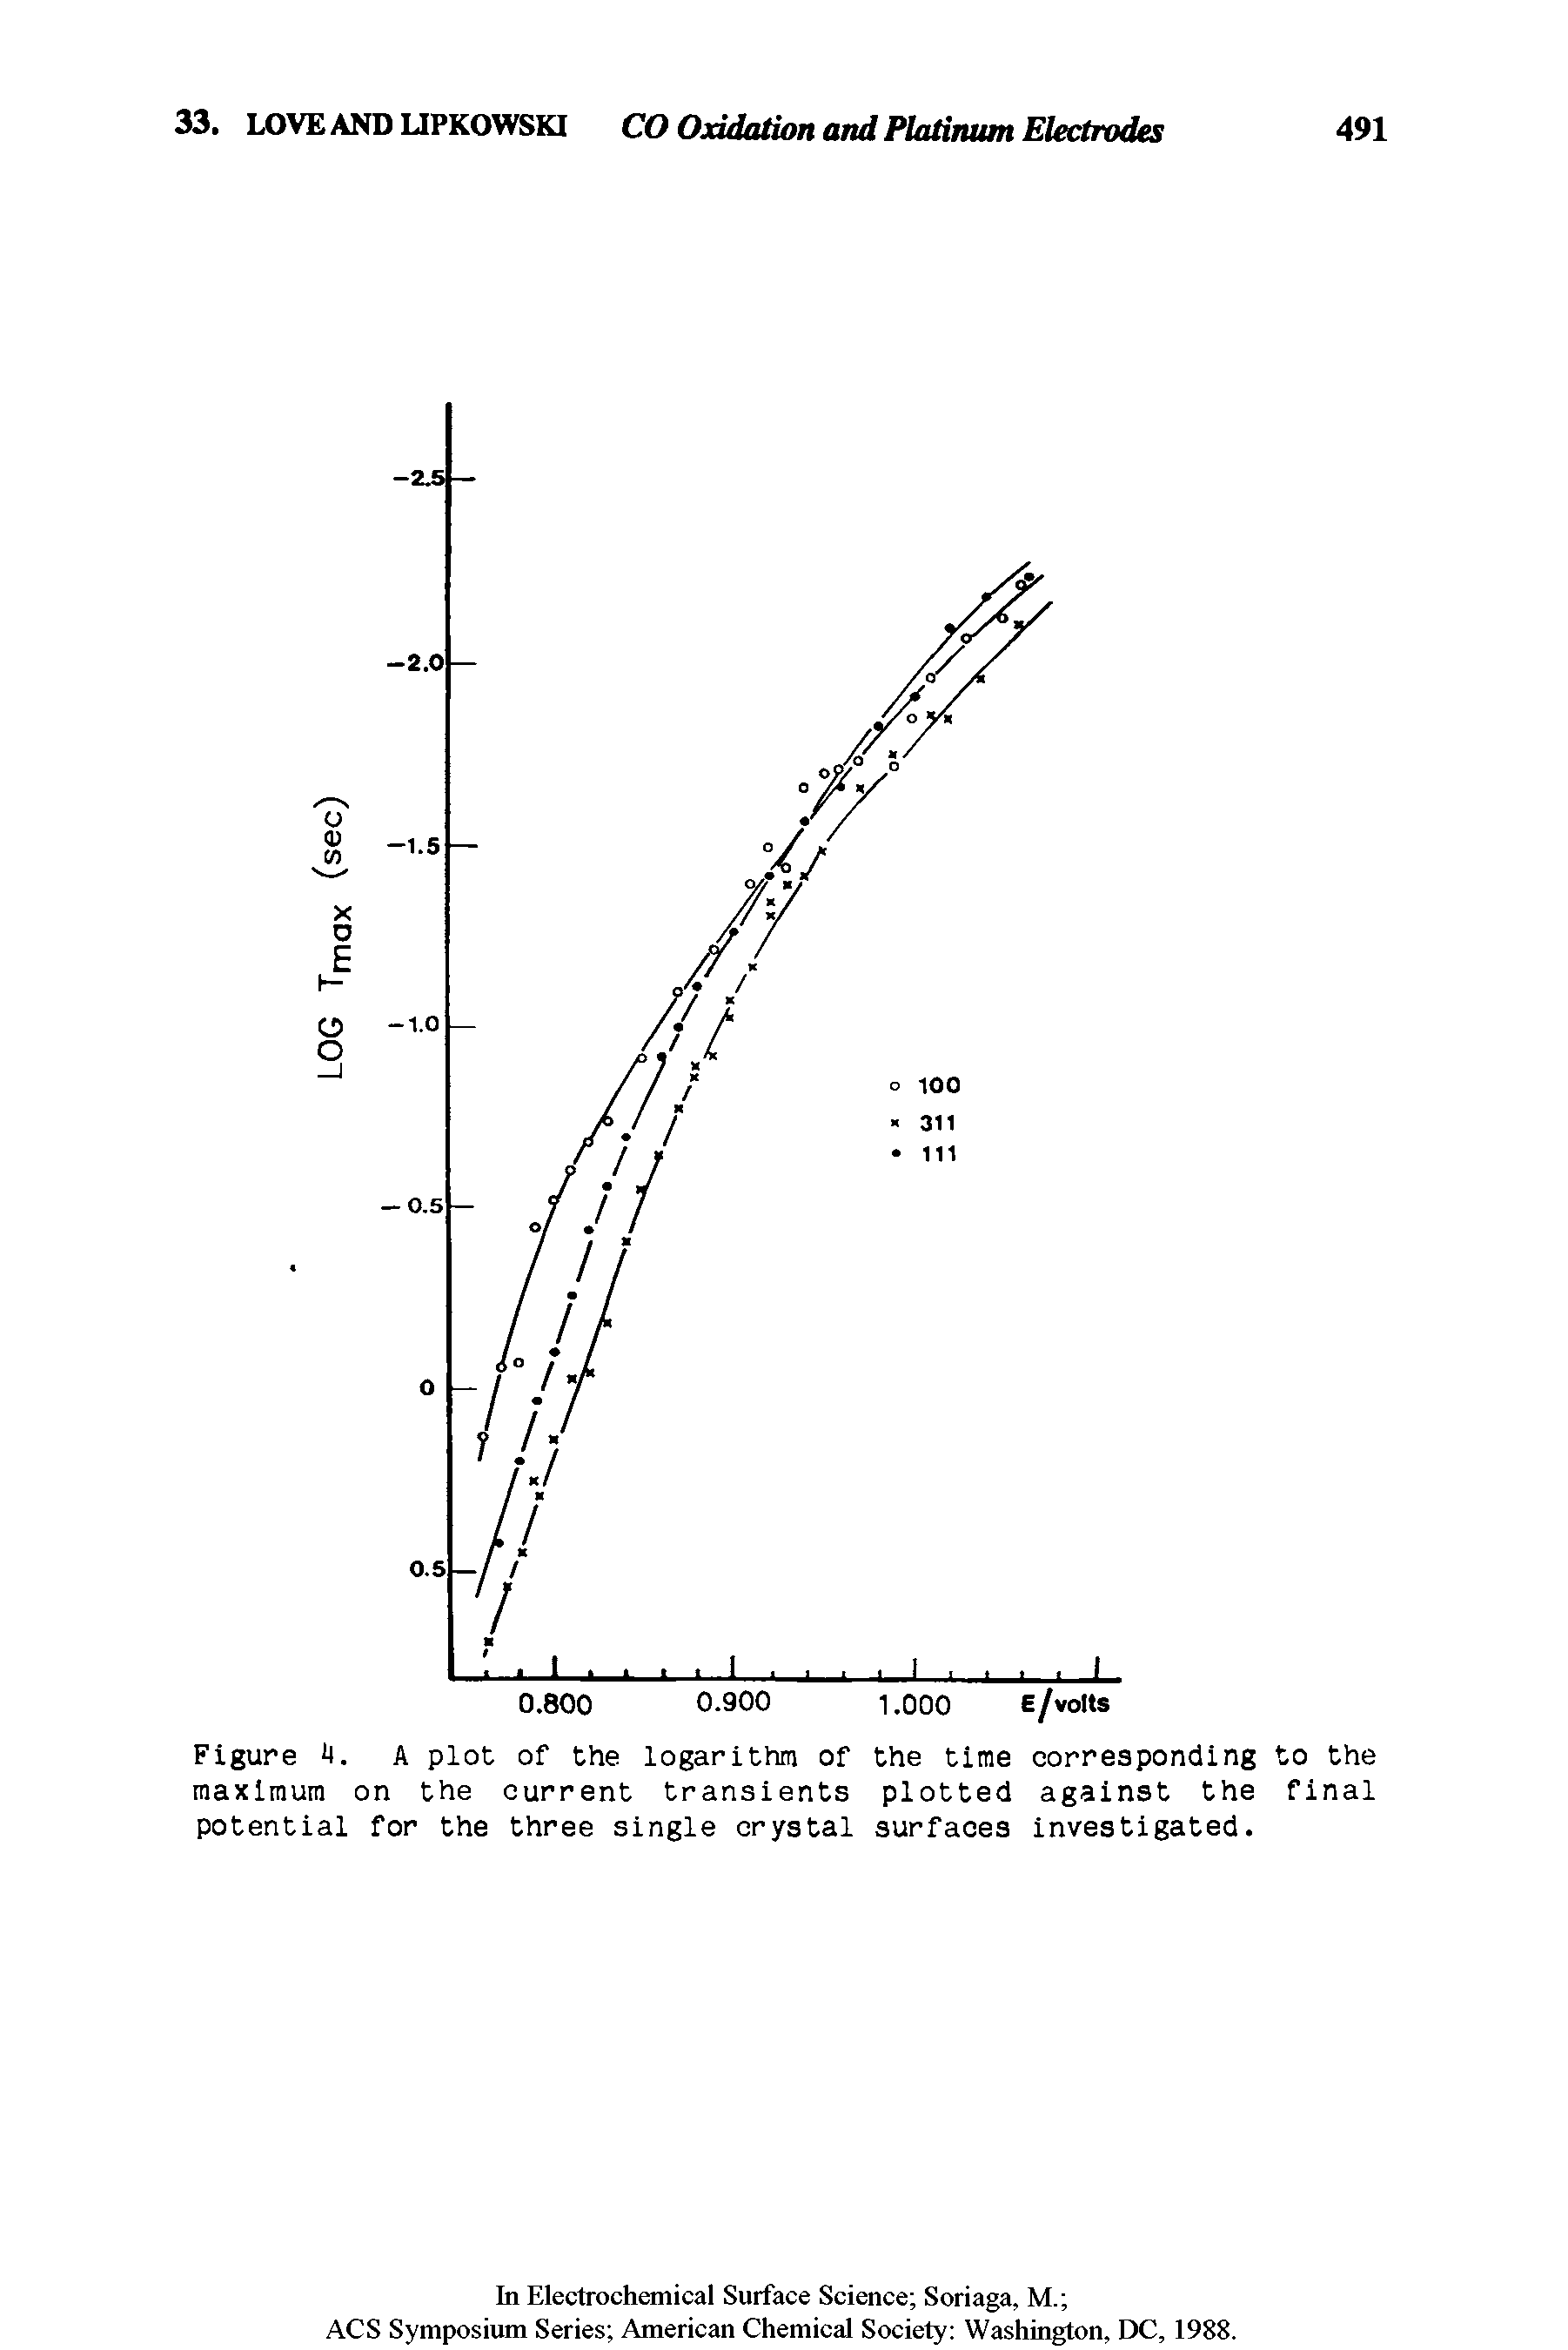 Figure A plot of the logarithm of the time corresponding to the maximum on the current transients plotted against the final potential for the three single crystal surfaces investigated.